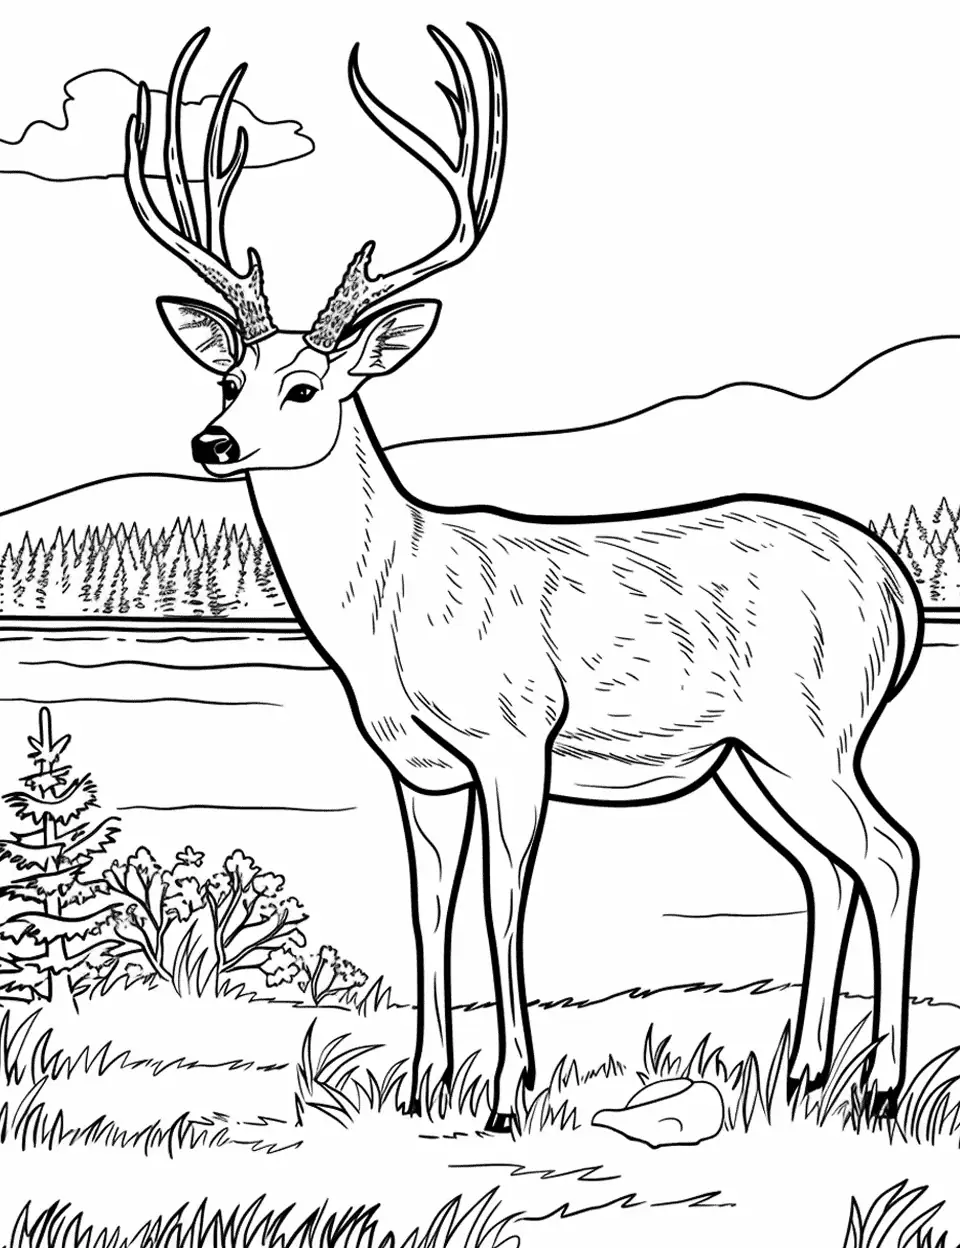 Realistic Buck by the Lake Coloring Page - A majestic buck standing beside a serene lake.